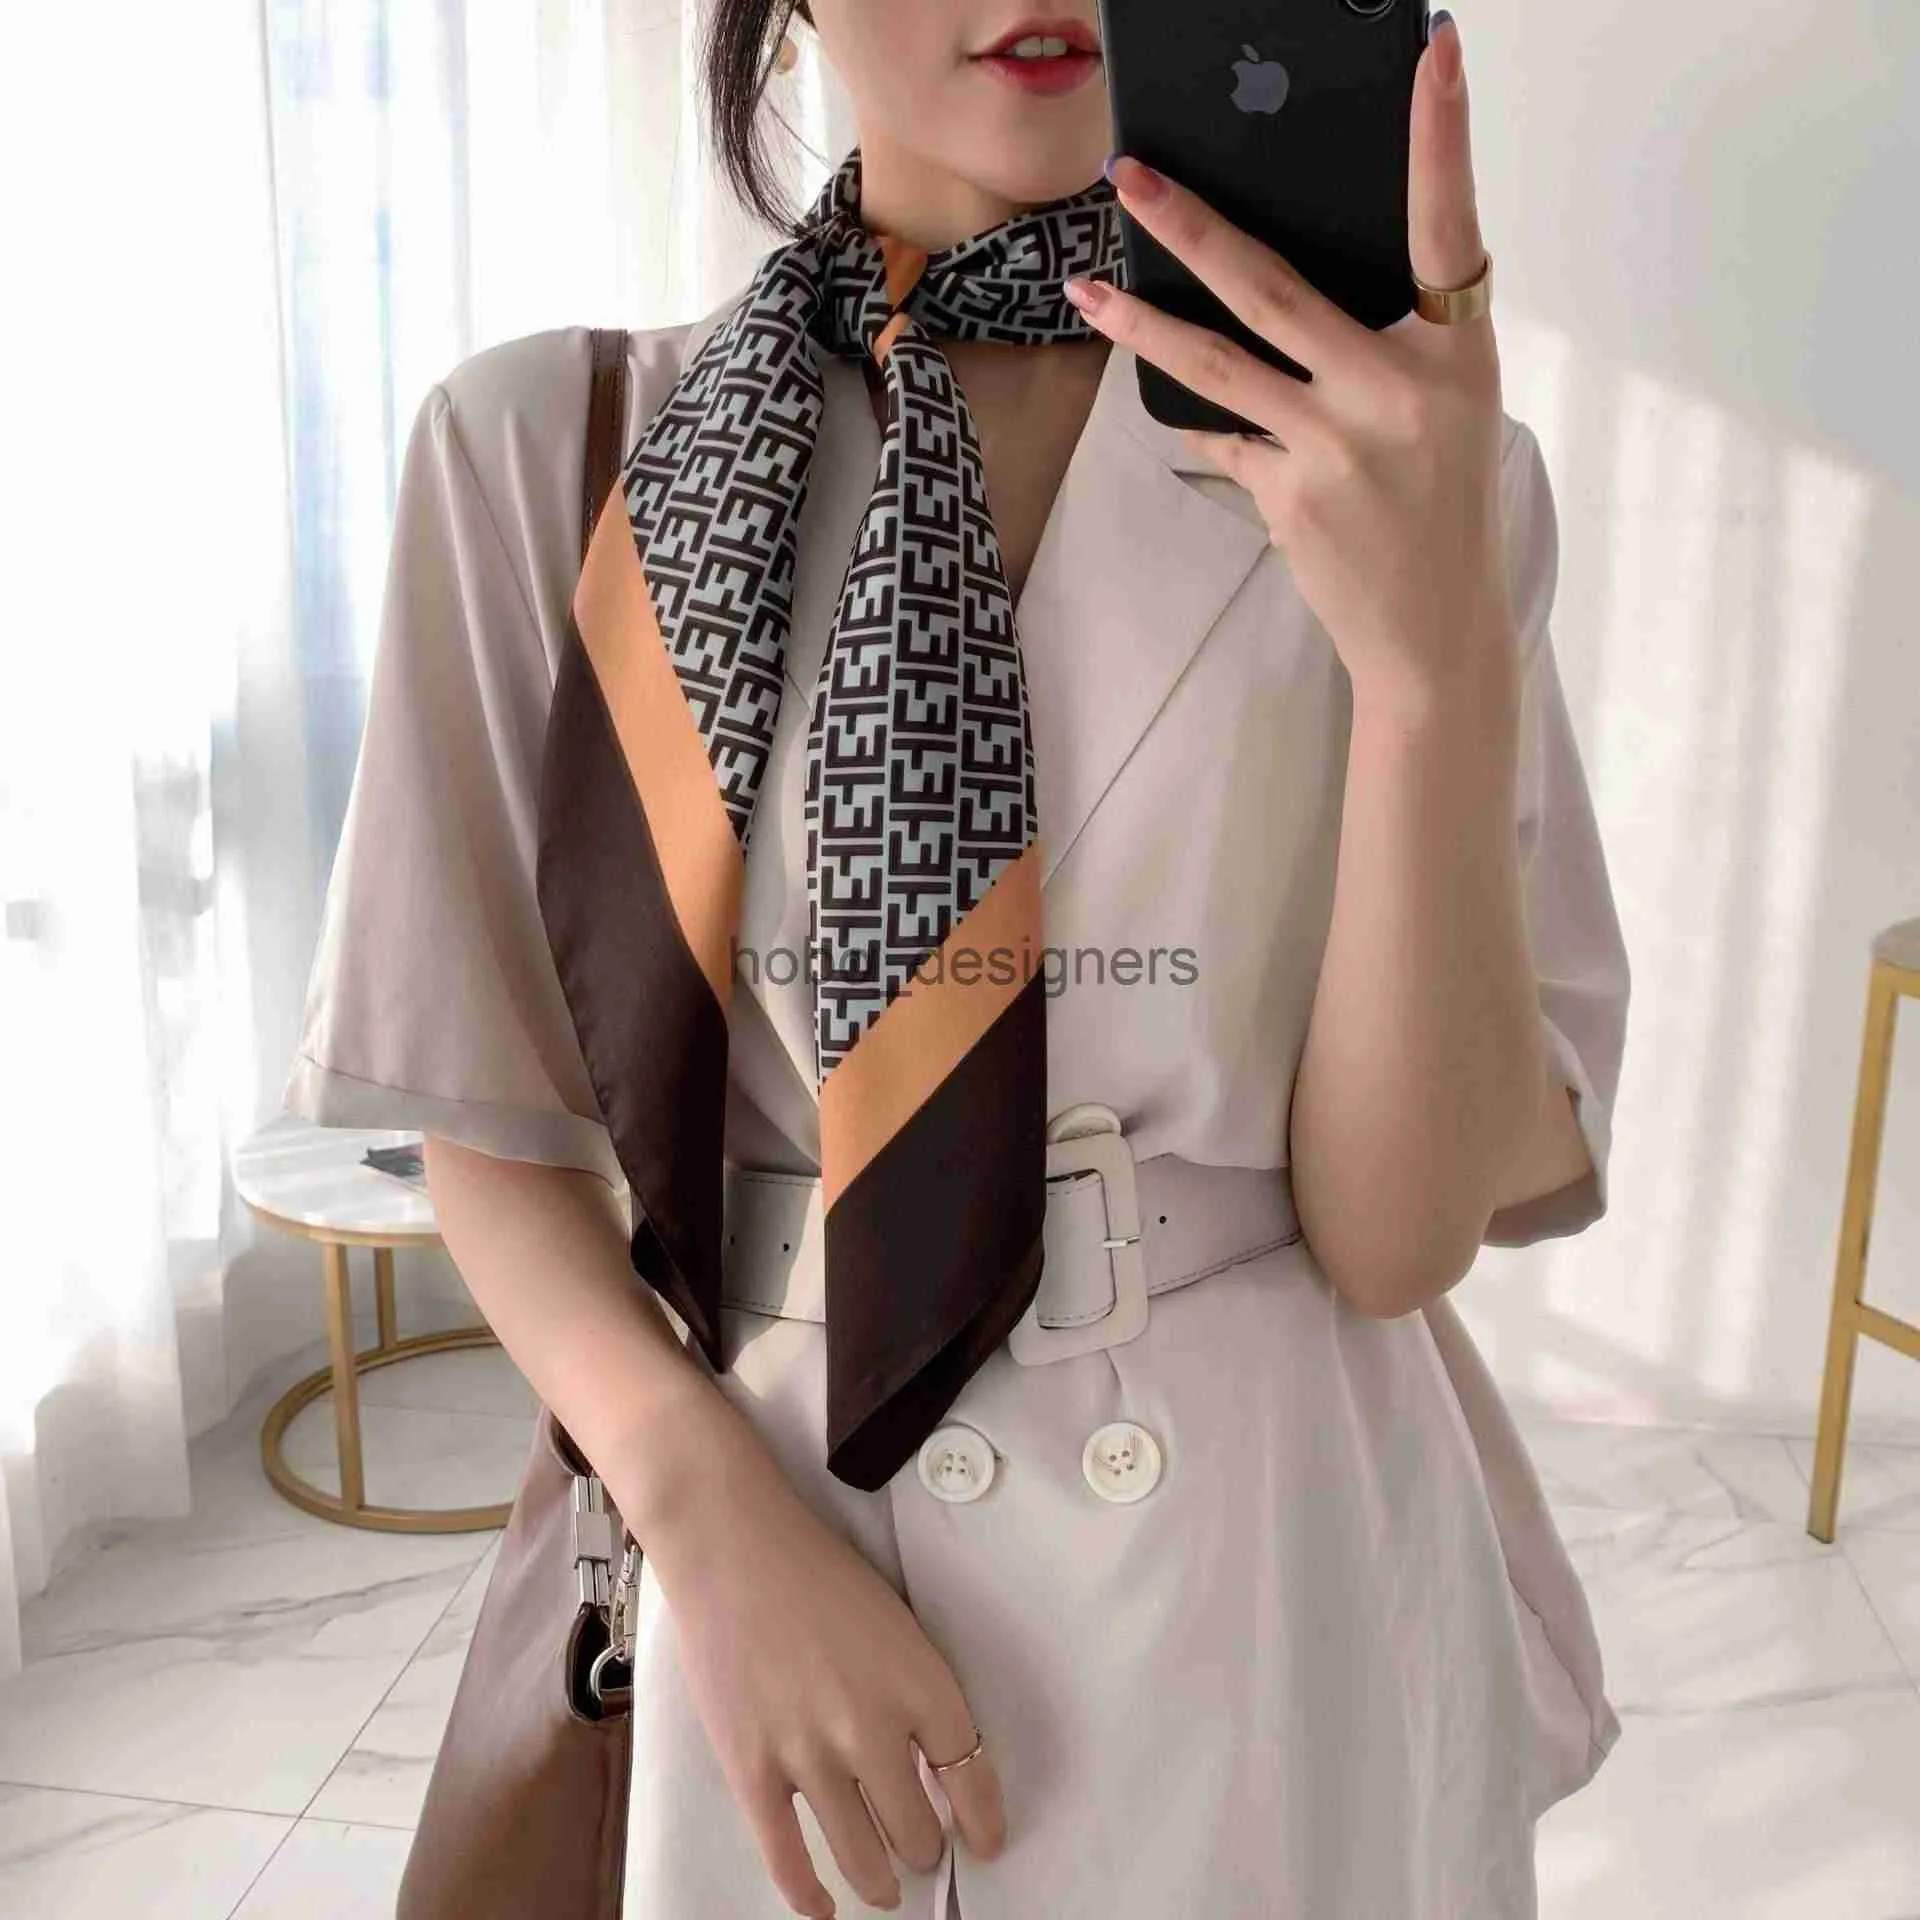 Luxury Pink Twilly Scarf For Bag For Women Designer Handbag With Headband  And Decorative Purse Material Fashionable Street Shopping Accessory PJ079  C23 From Hgldhgate, $4.83 | DHgate.Com